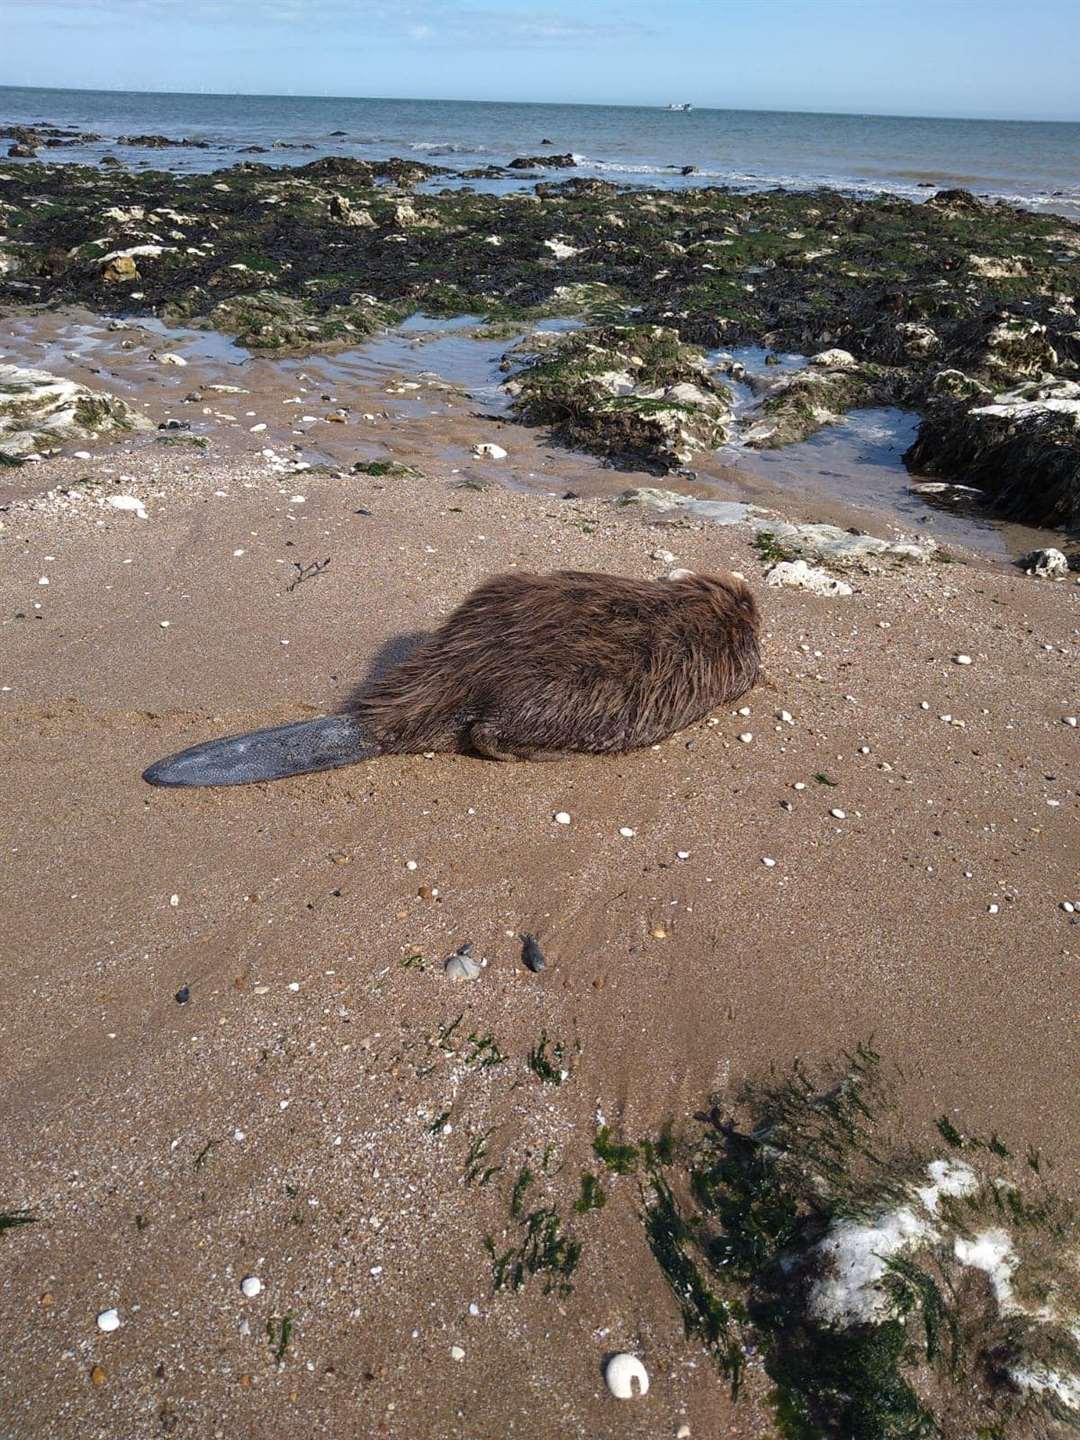 The beaver was found on the beach in Ramsgate. Picture: HM Coastguard Margate